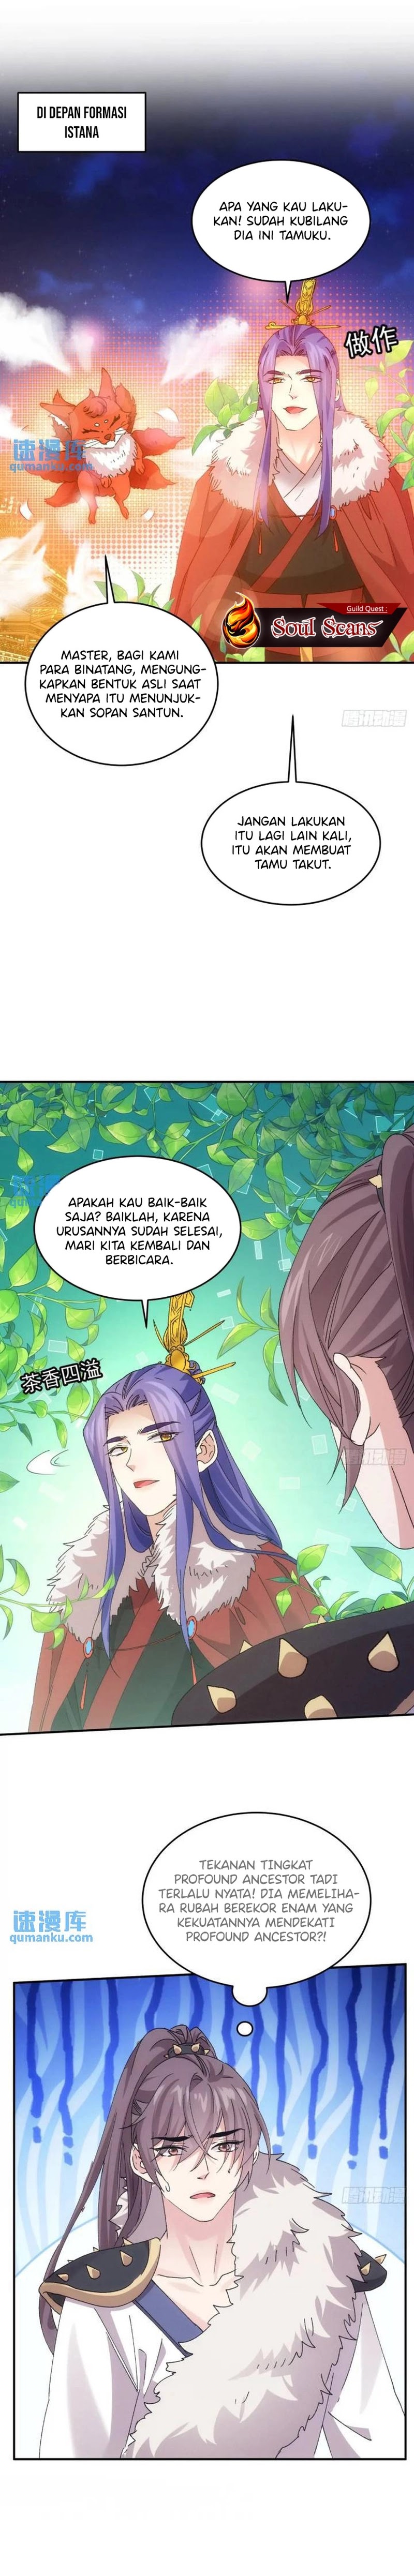 Dilarang COPAS - situs resmi www.mangacanblog.com - Komik i just dont play the card according to the routine 195 - chapter 195 196 Indonesia i just dont play the card according to the routine 195 - chapter 195 Terbaru 1|Baca Manga Komik Indonesia|Mangacan